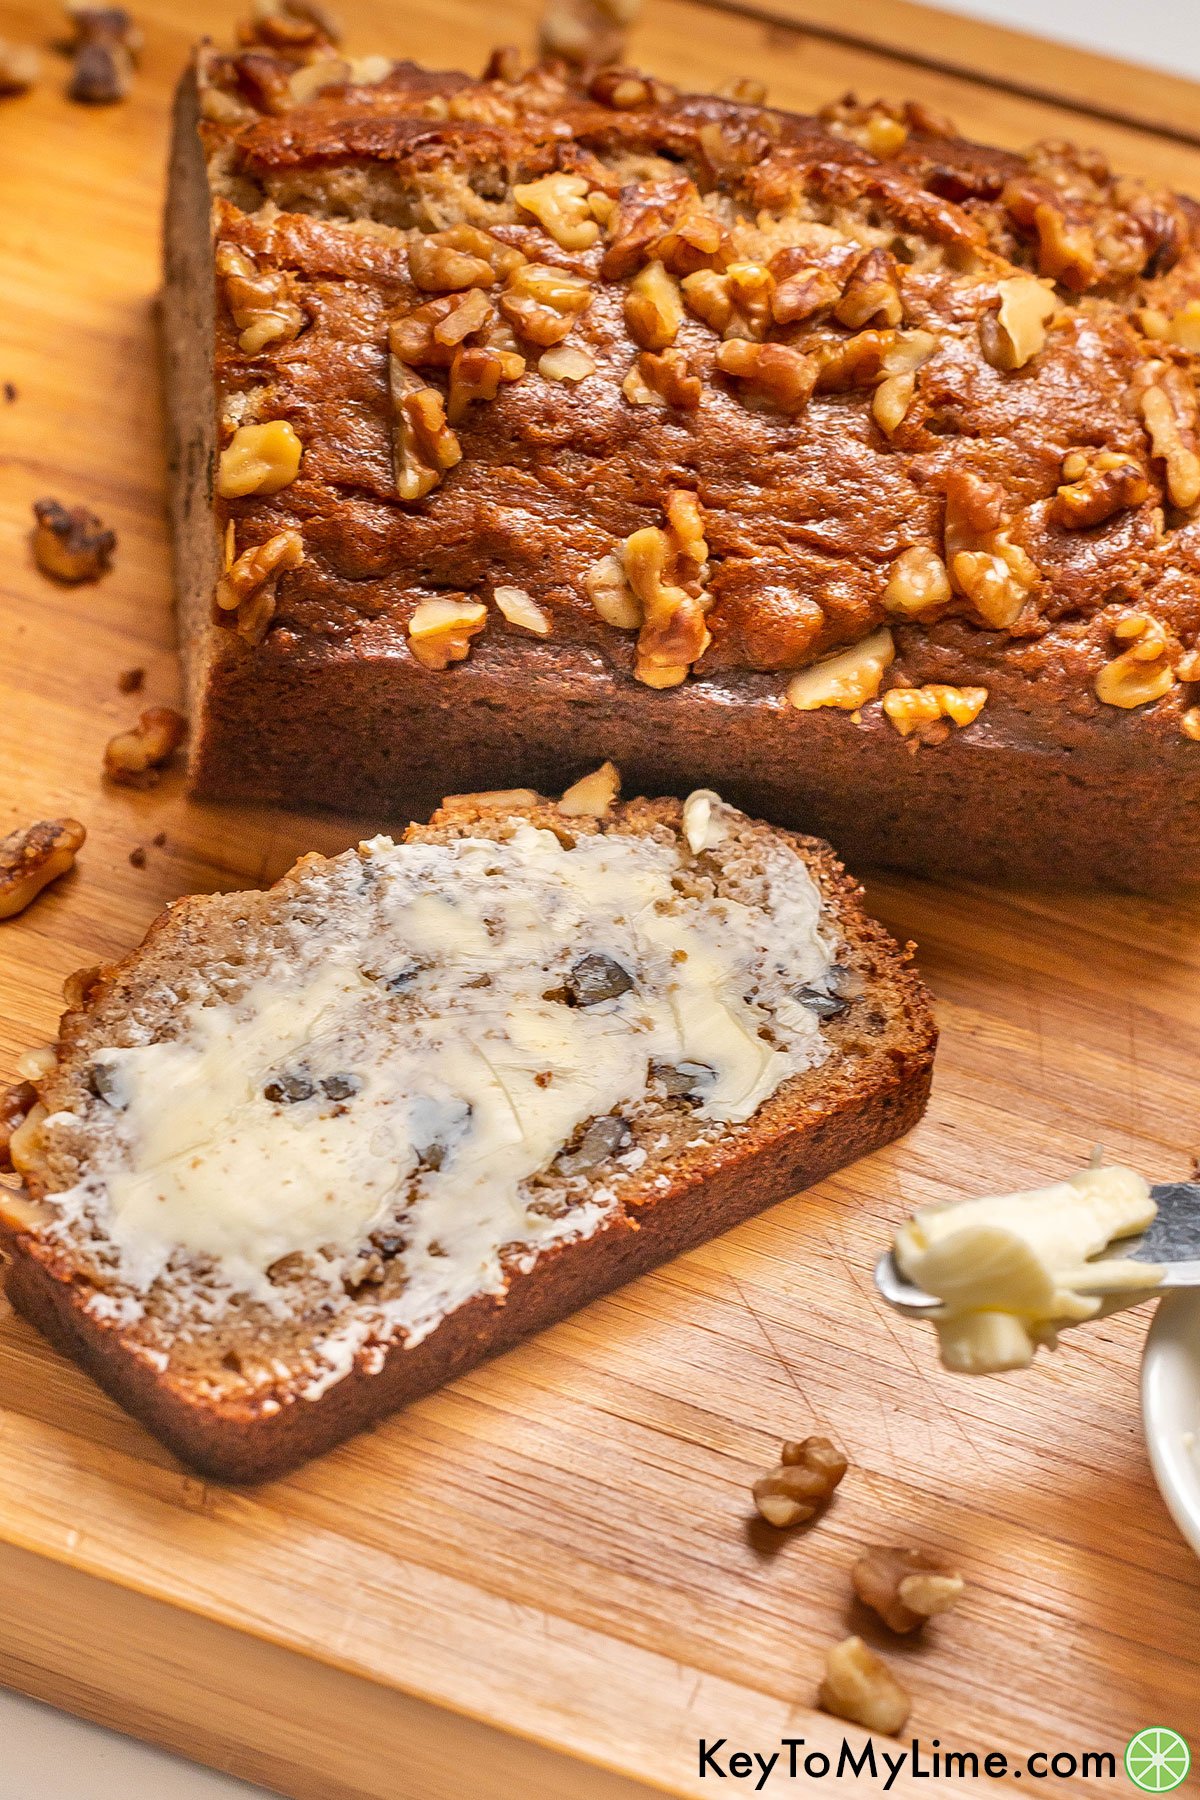 A thick slice of moist banana nut bread with a layer of butter on top.